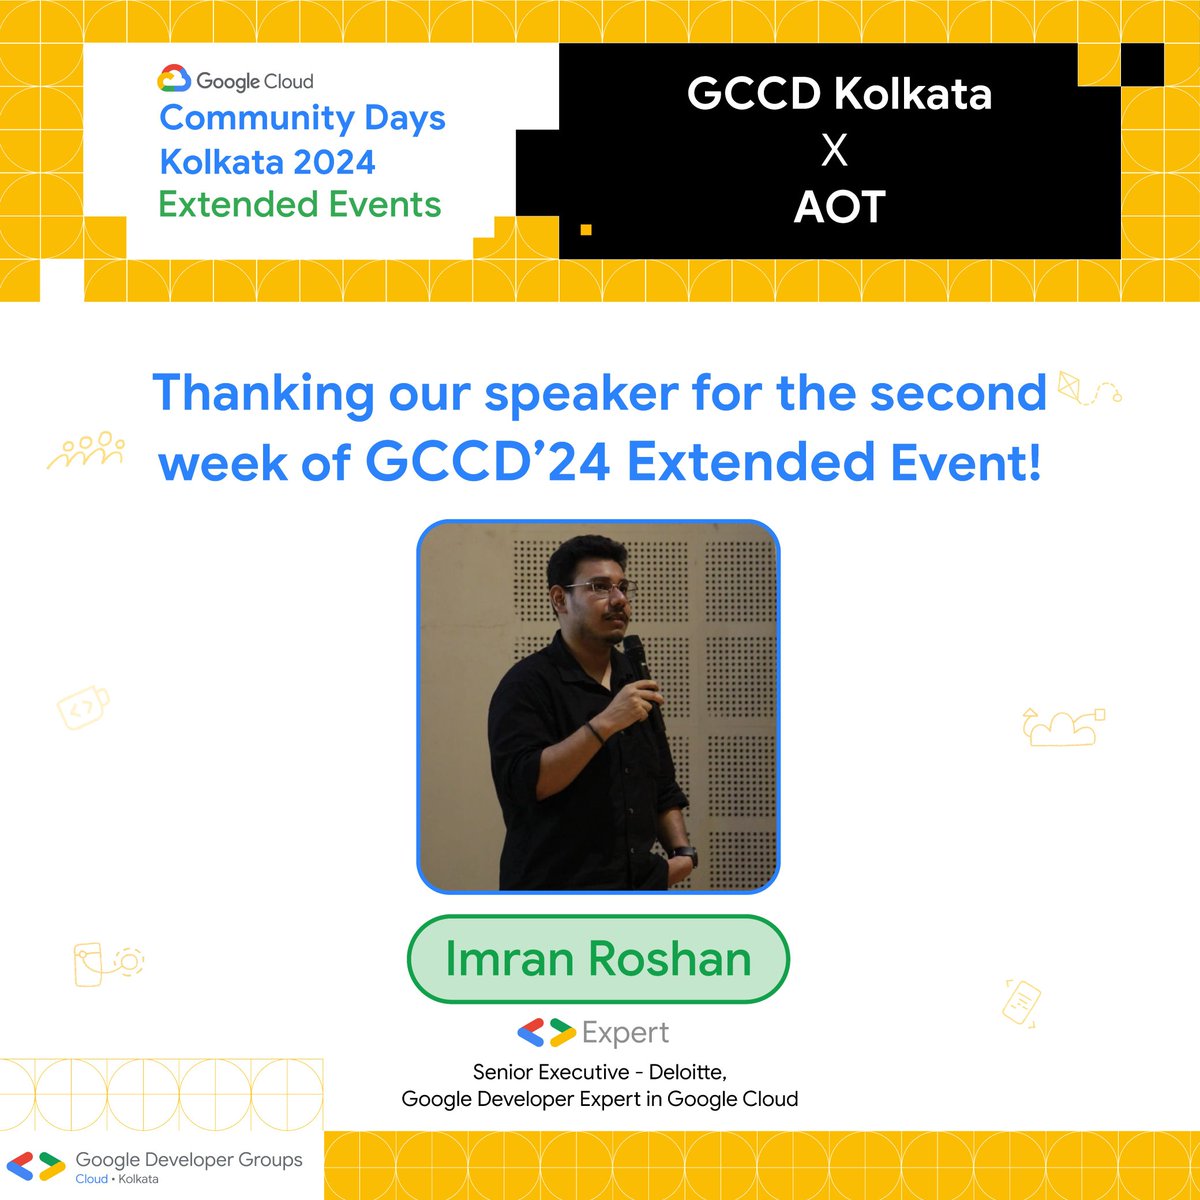 GCCD Kol extends a huge thanks to @imranfosec for an incredibly engaging session 'Smart threat hunting on GCP' at week 2 of Extended Events -> GCCD Kol'24  x GDSC AOT ! 🌟

#gdgcloudkol #gccdkol #gccdkol24 #ticketsToGCCD #likeneverbefore